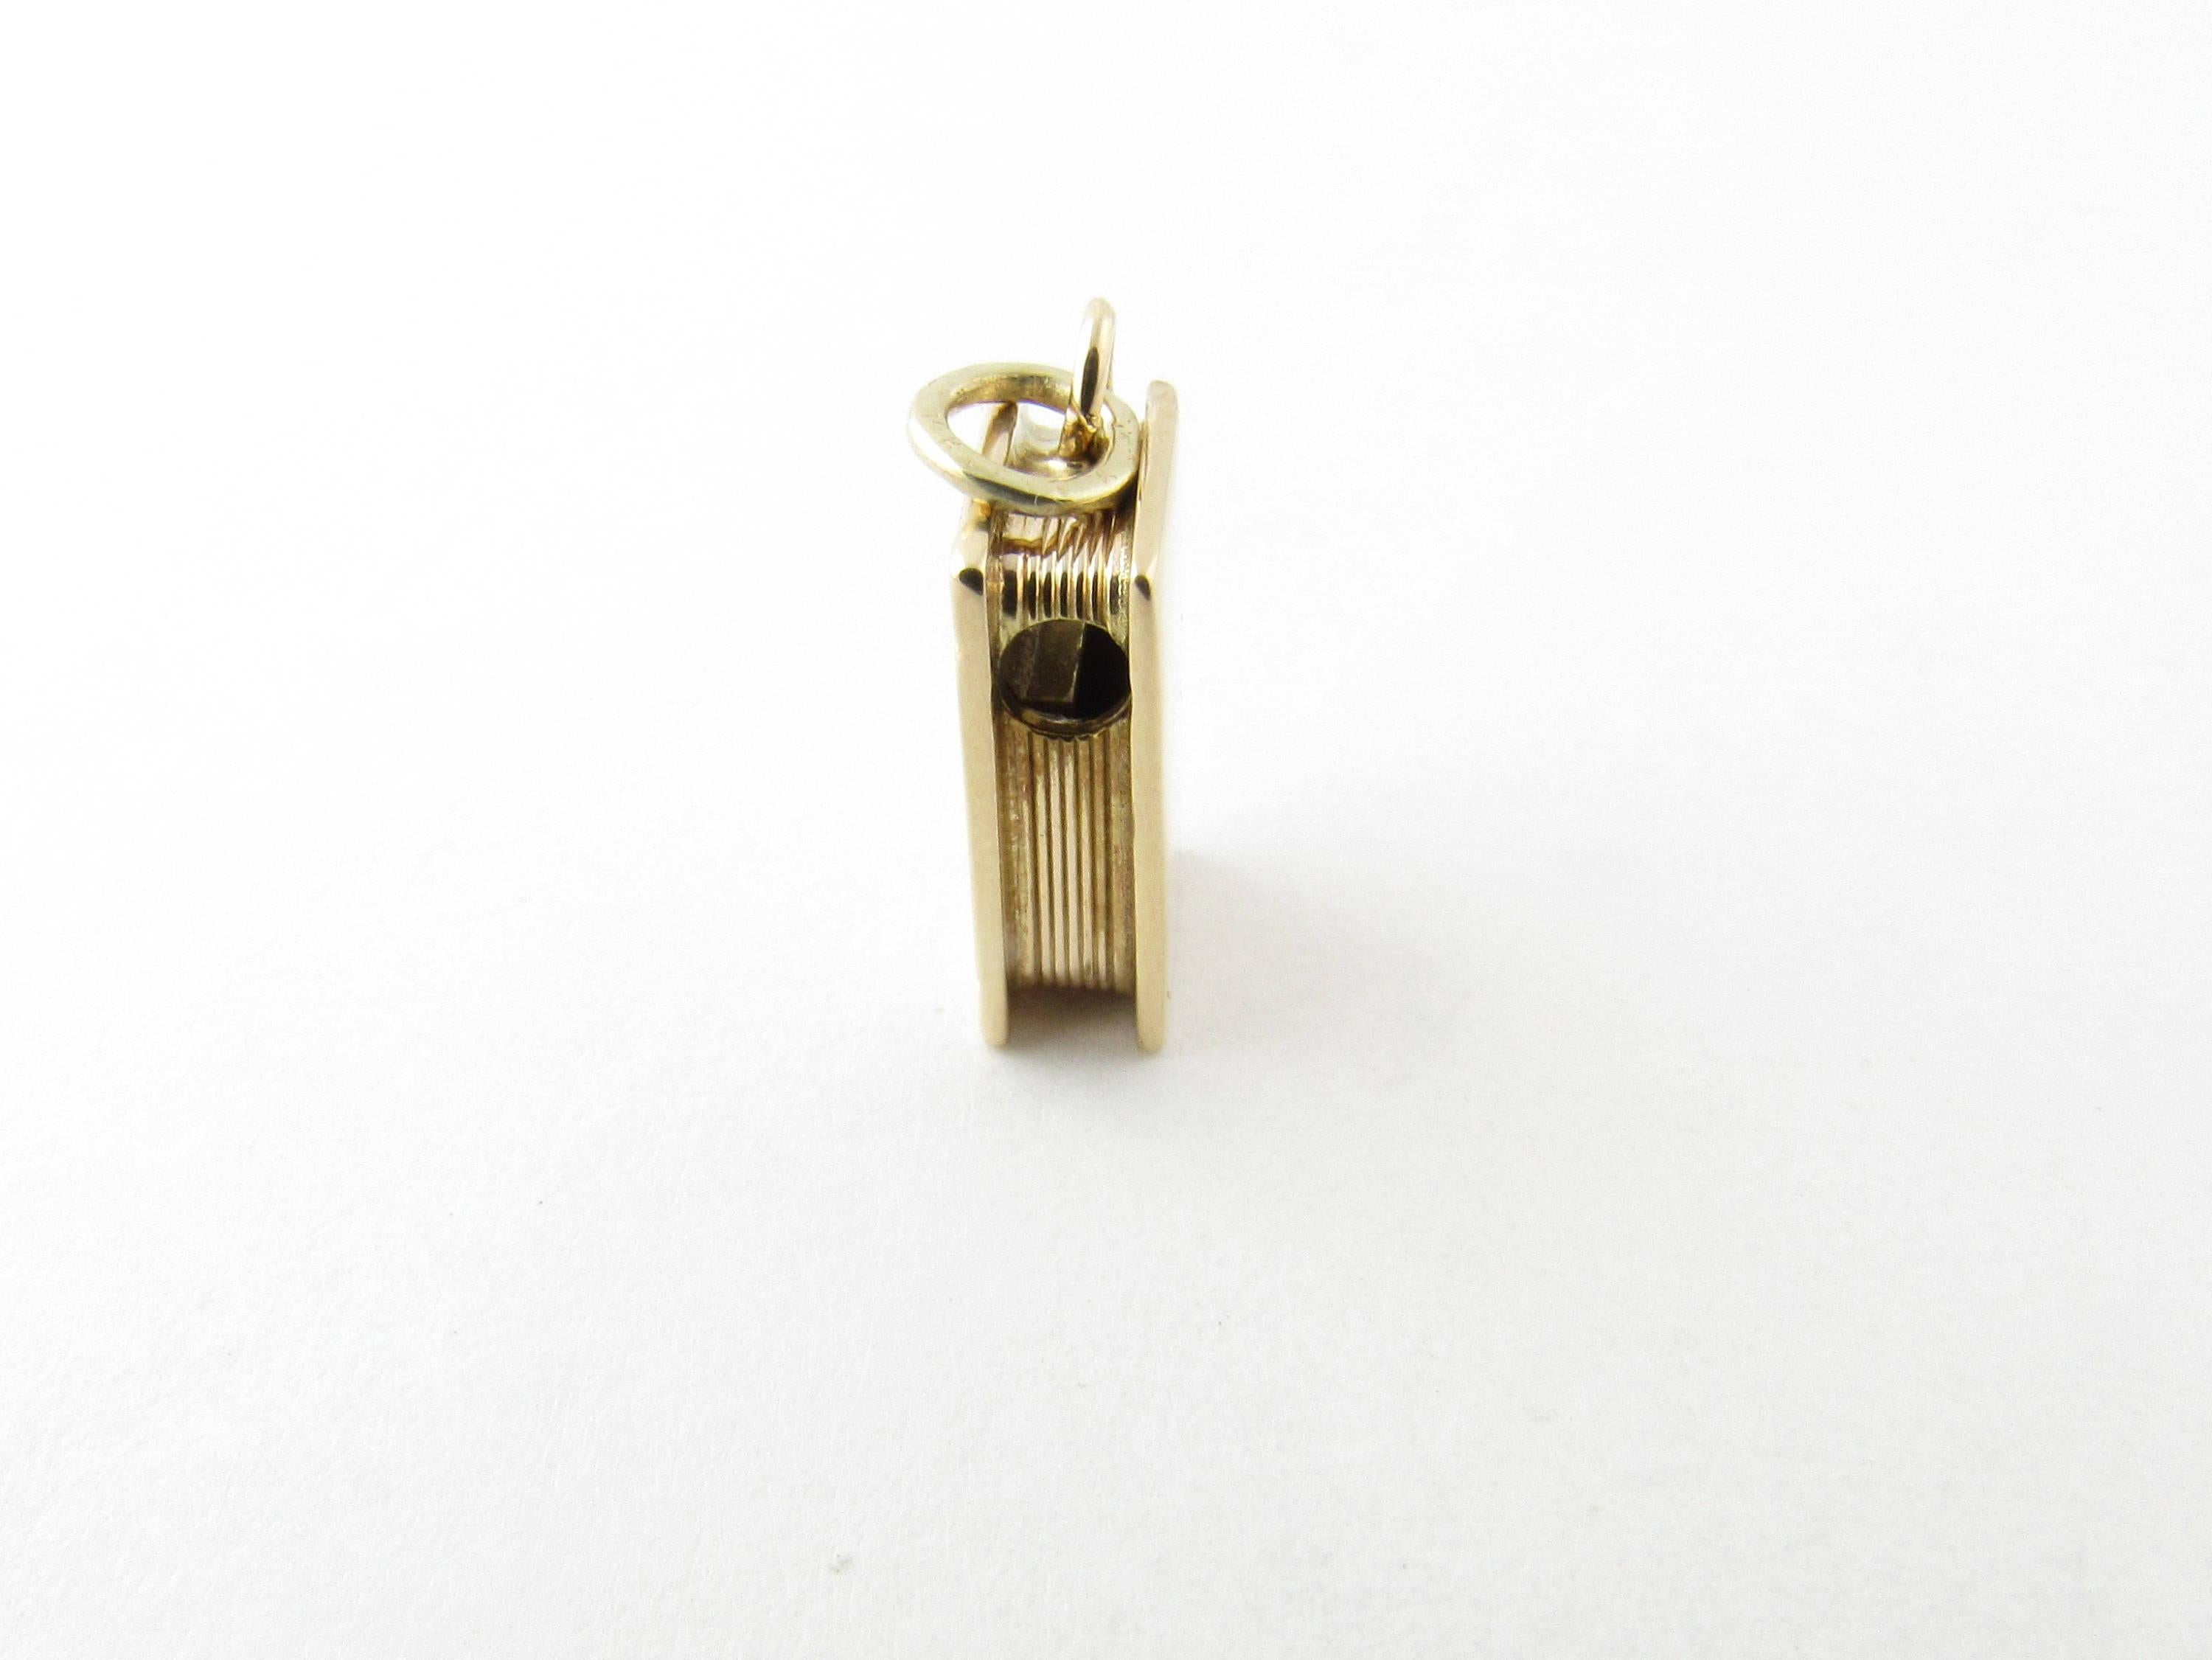 Vintage 14 Karat Yellow Gold Bible Charm-

This lovely 3D charm features a miniature Bible detailed with a lovely cross on its cover.

Can also be worn as a pendant hole through top as shown.

Size:  12 mm x  8mm (actual charm)

Weight:  1.6 dwt. / 